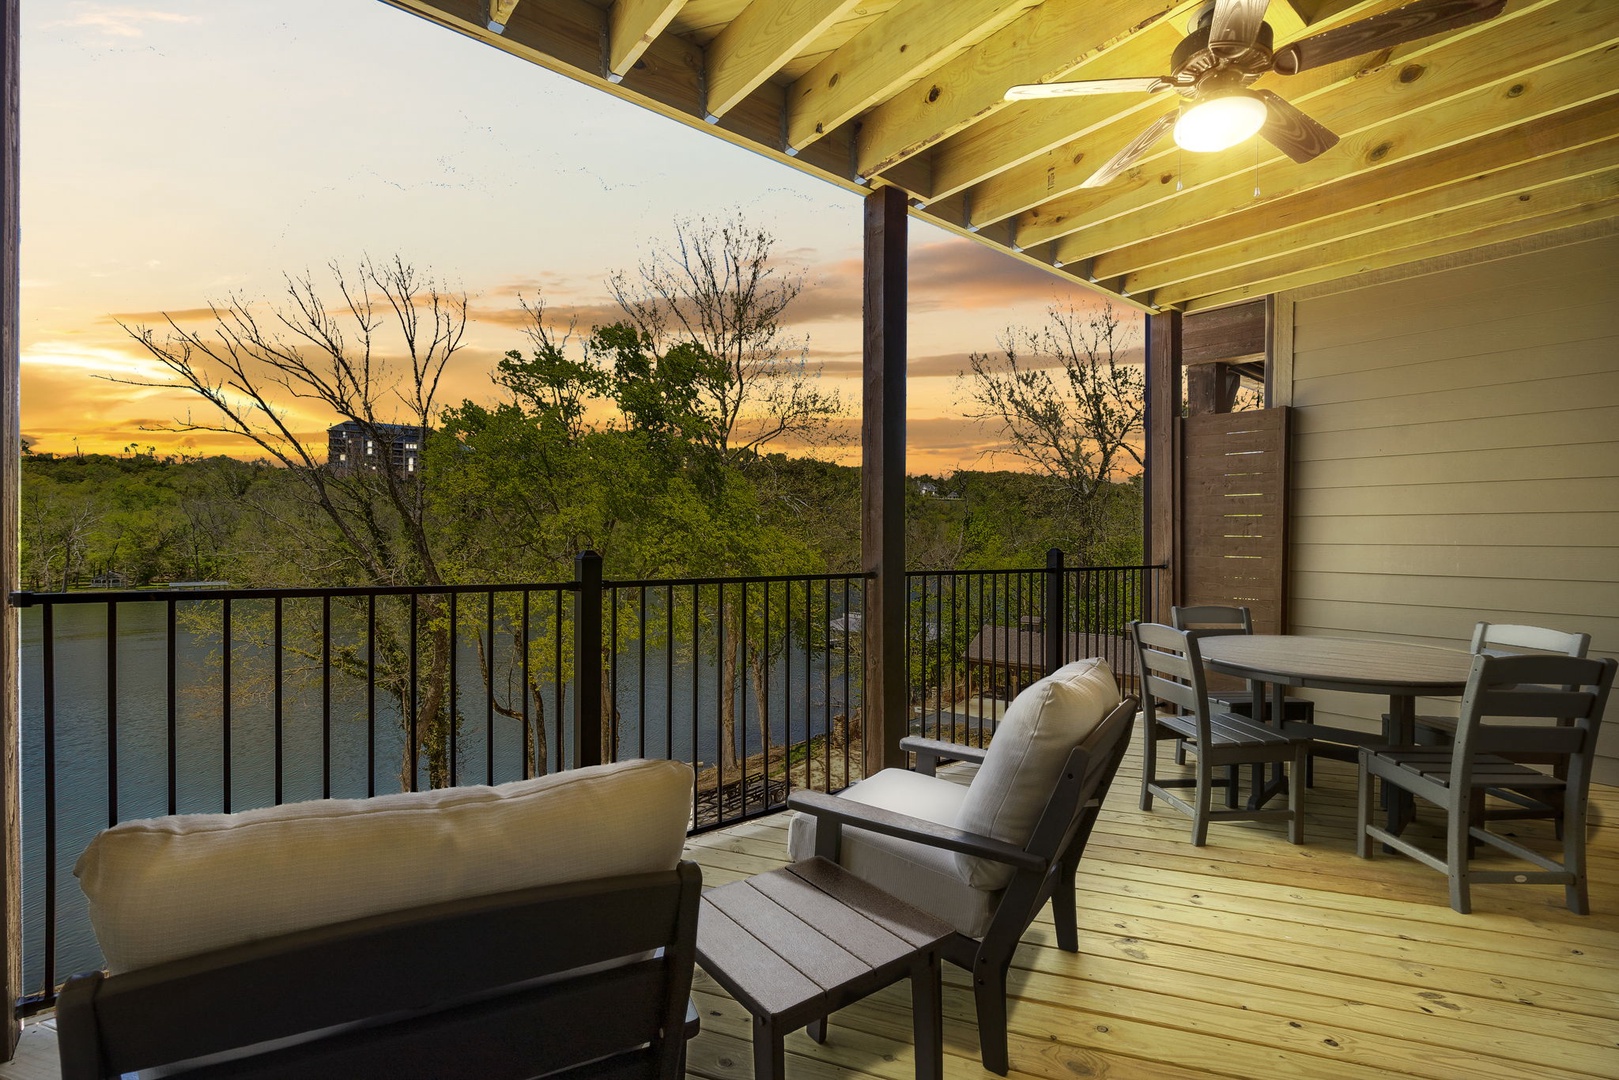 Soak in the sunset views while relaxing on the spacious back deck